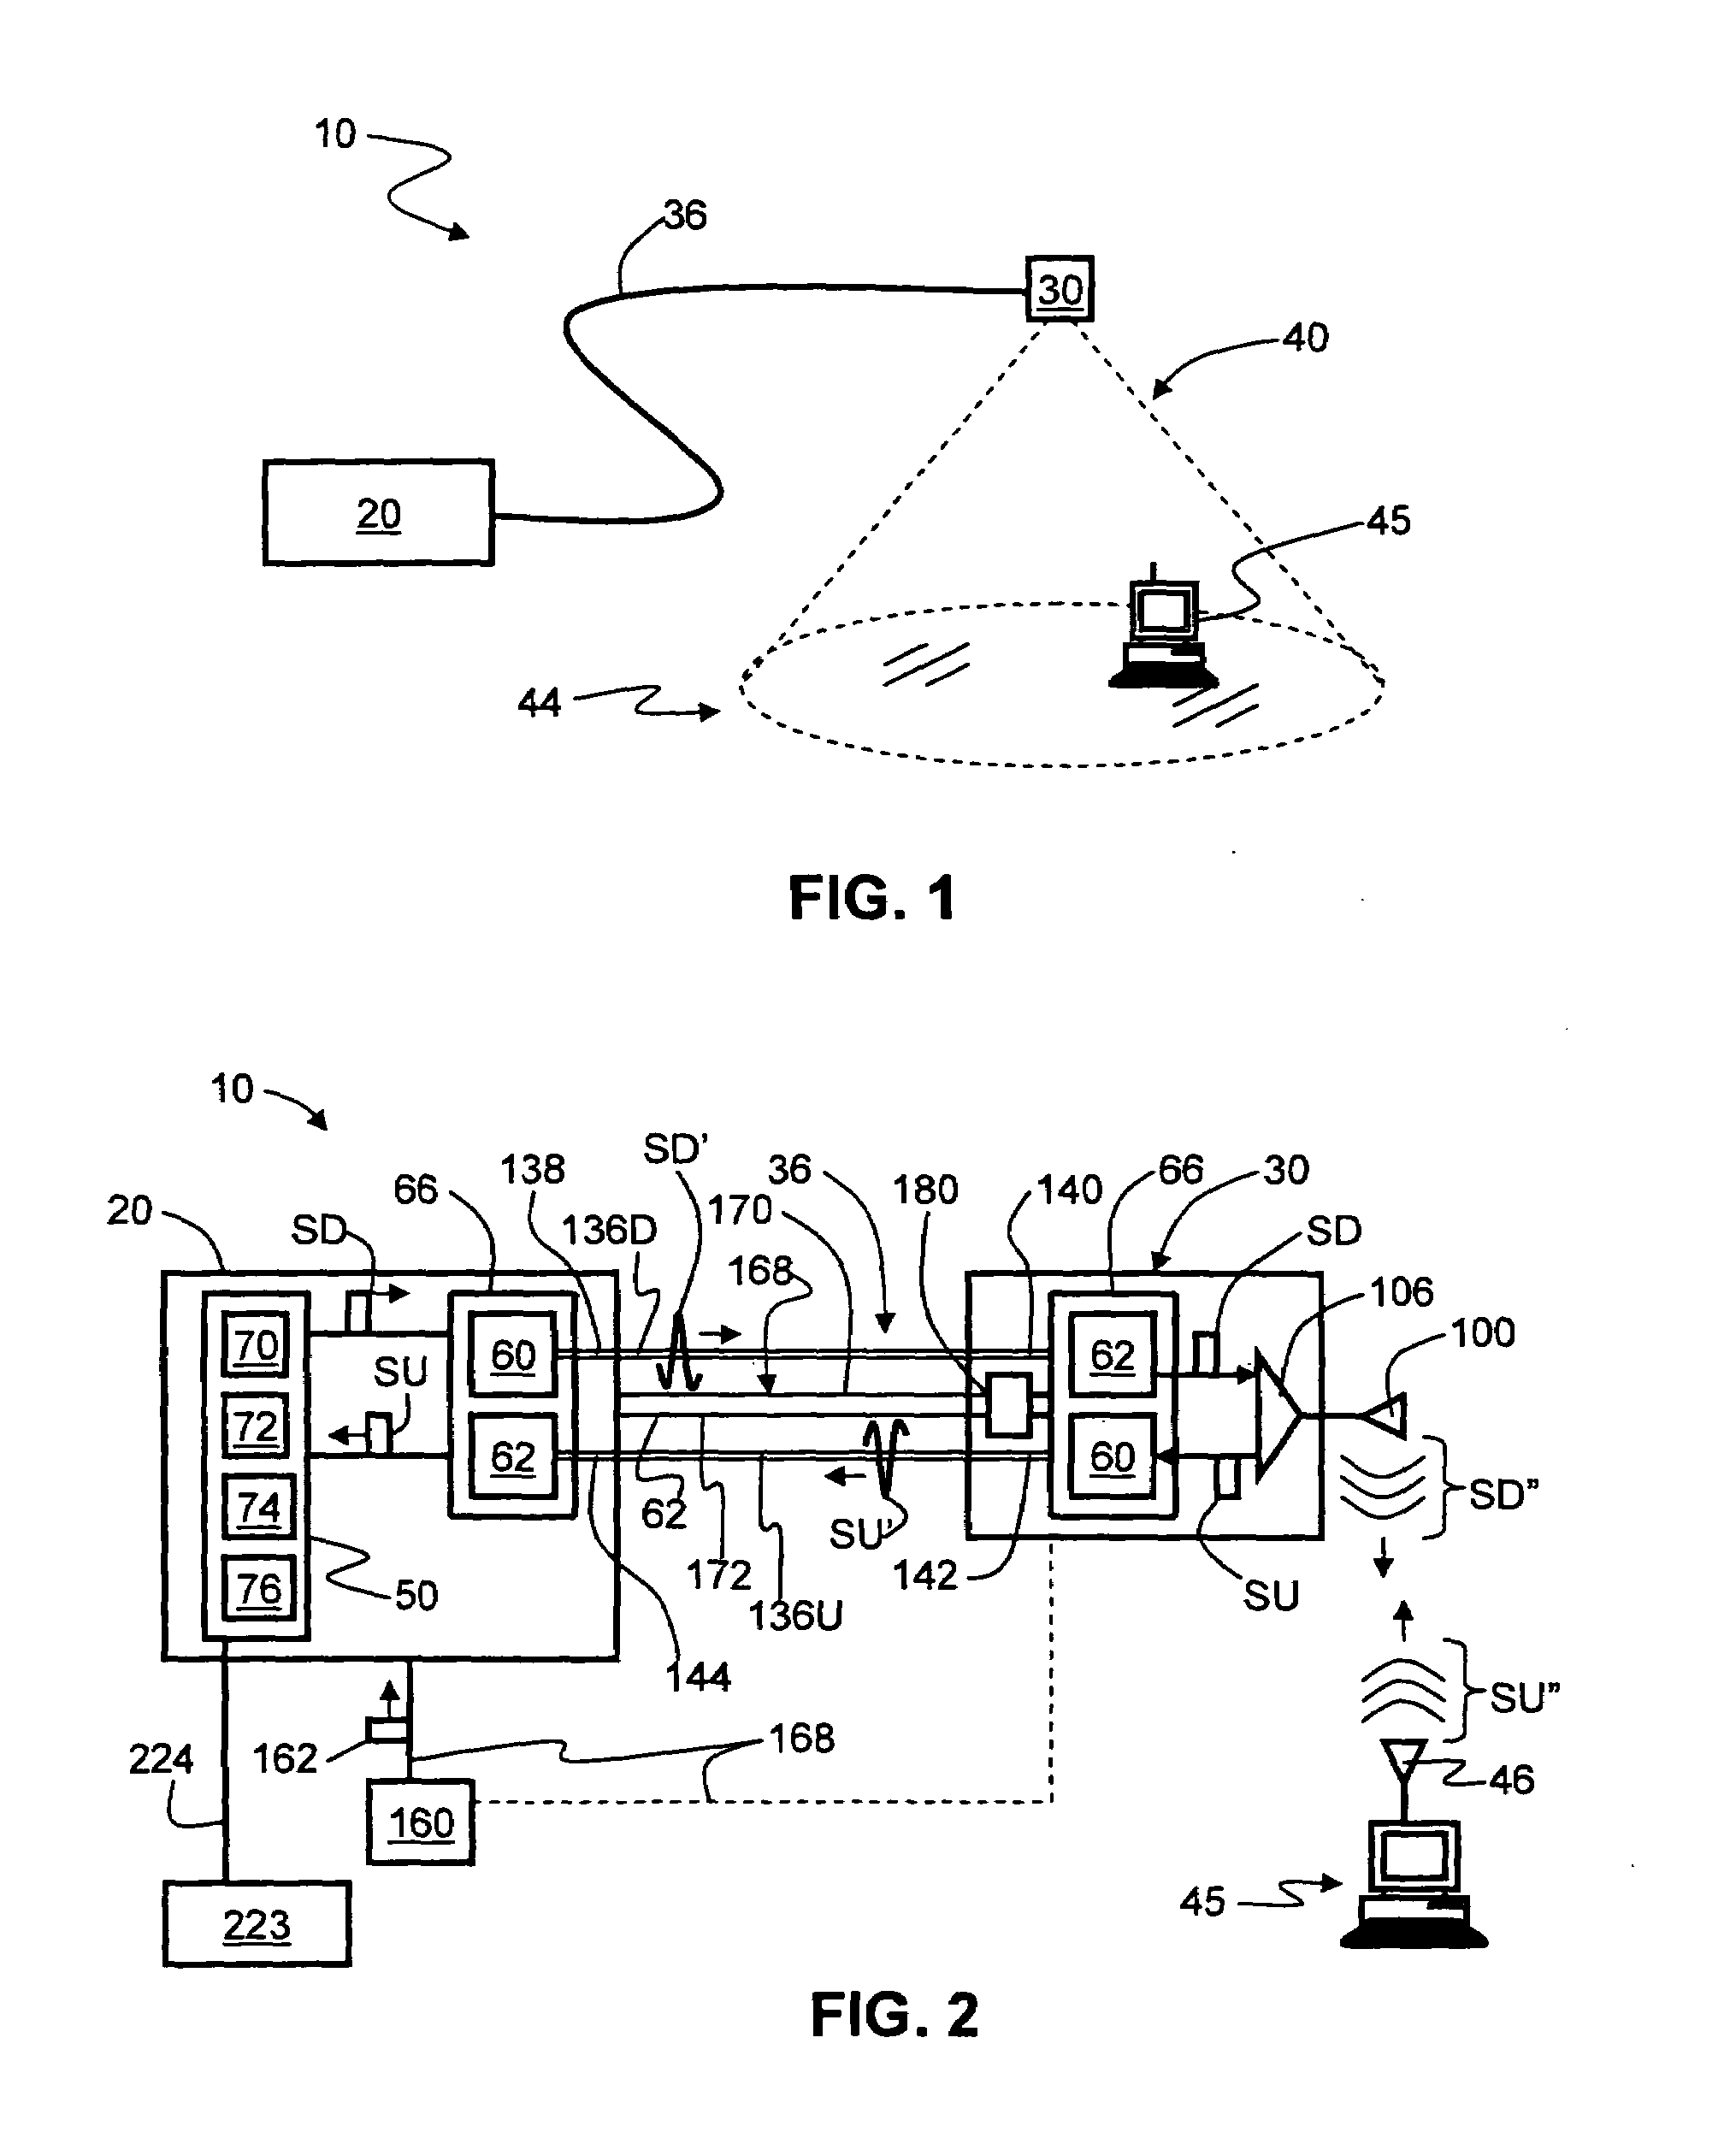 Radio-over-fiber (RoF) optical fiber cable system with transponder diversity and RoF wireless picocellular system using same